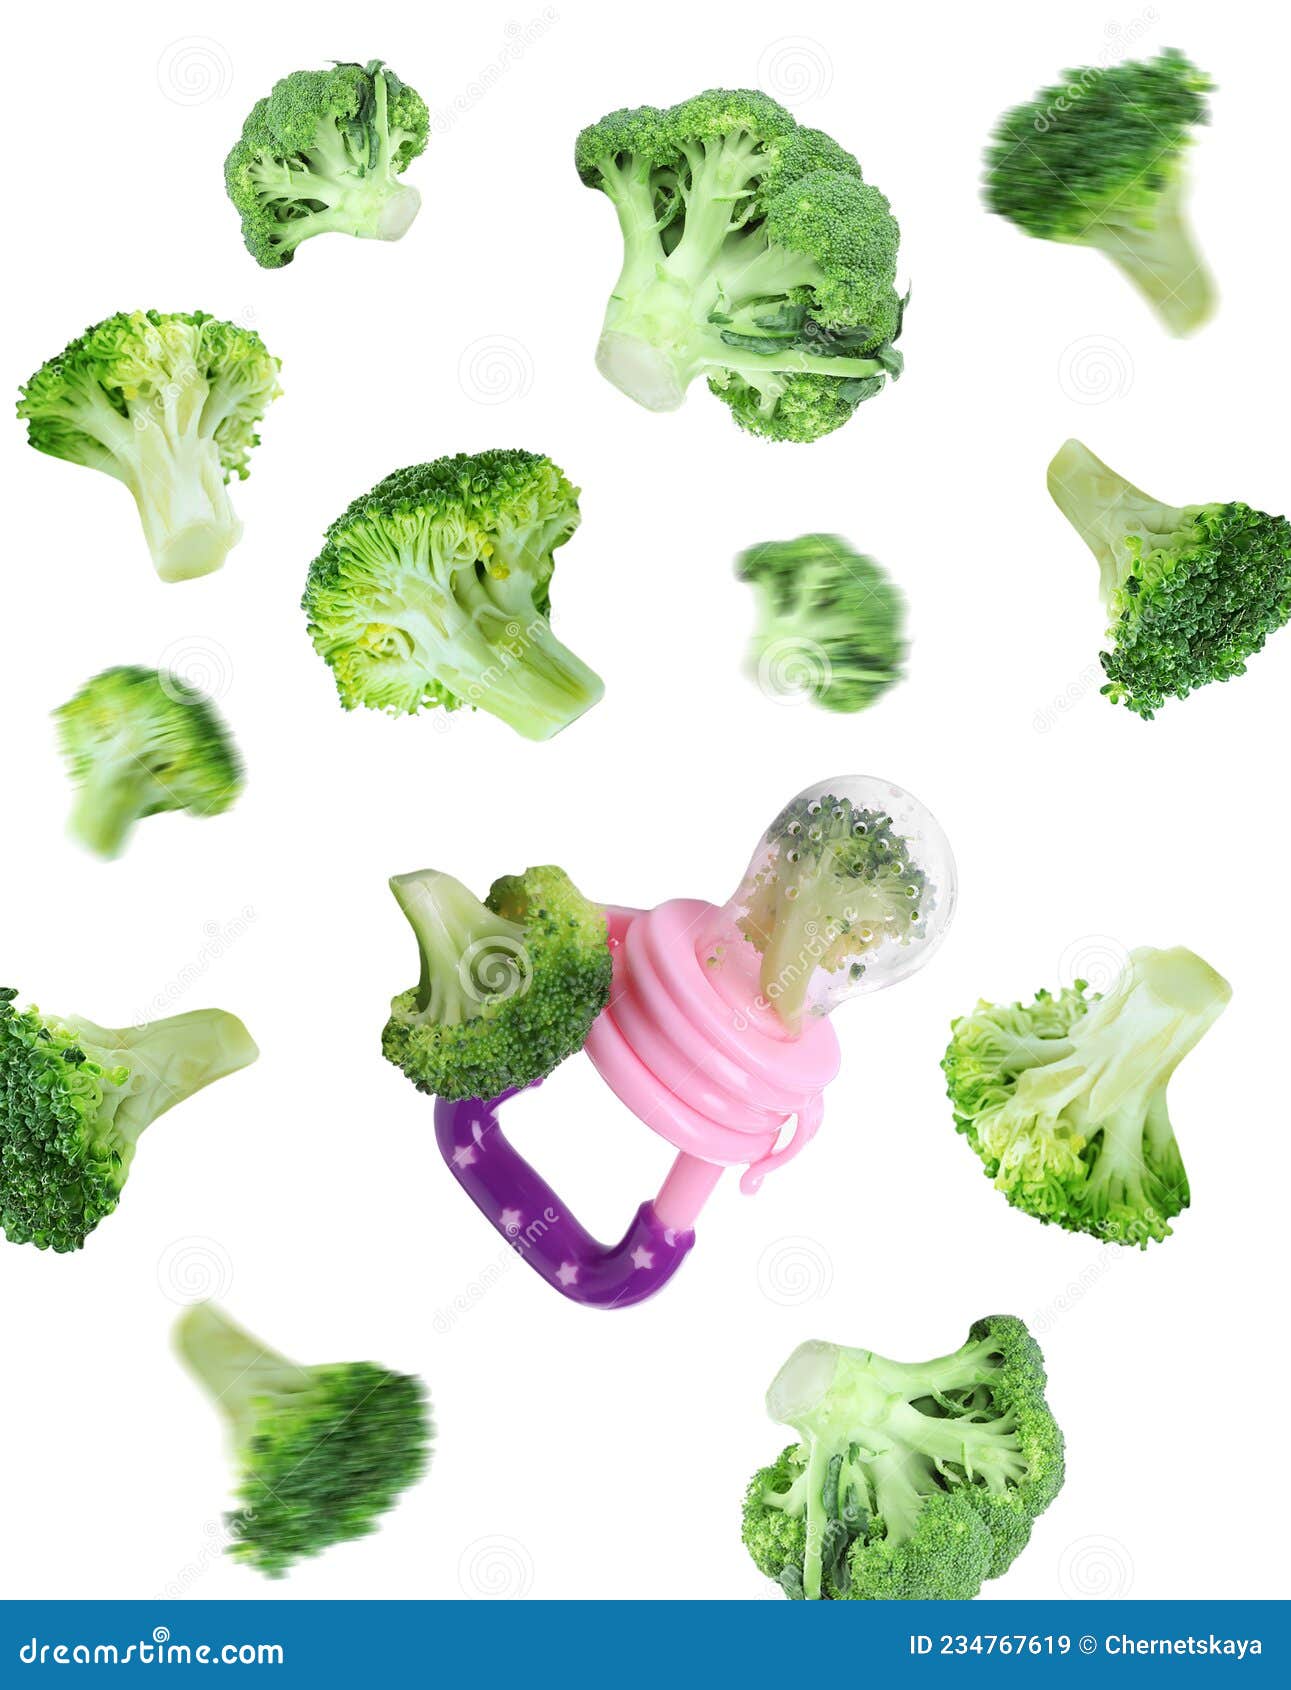 nibbler and  green broccoli falling on white background. baby feeder